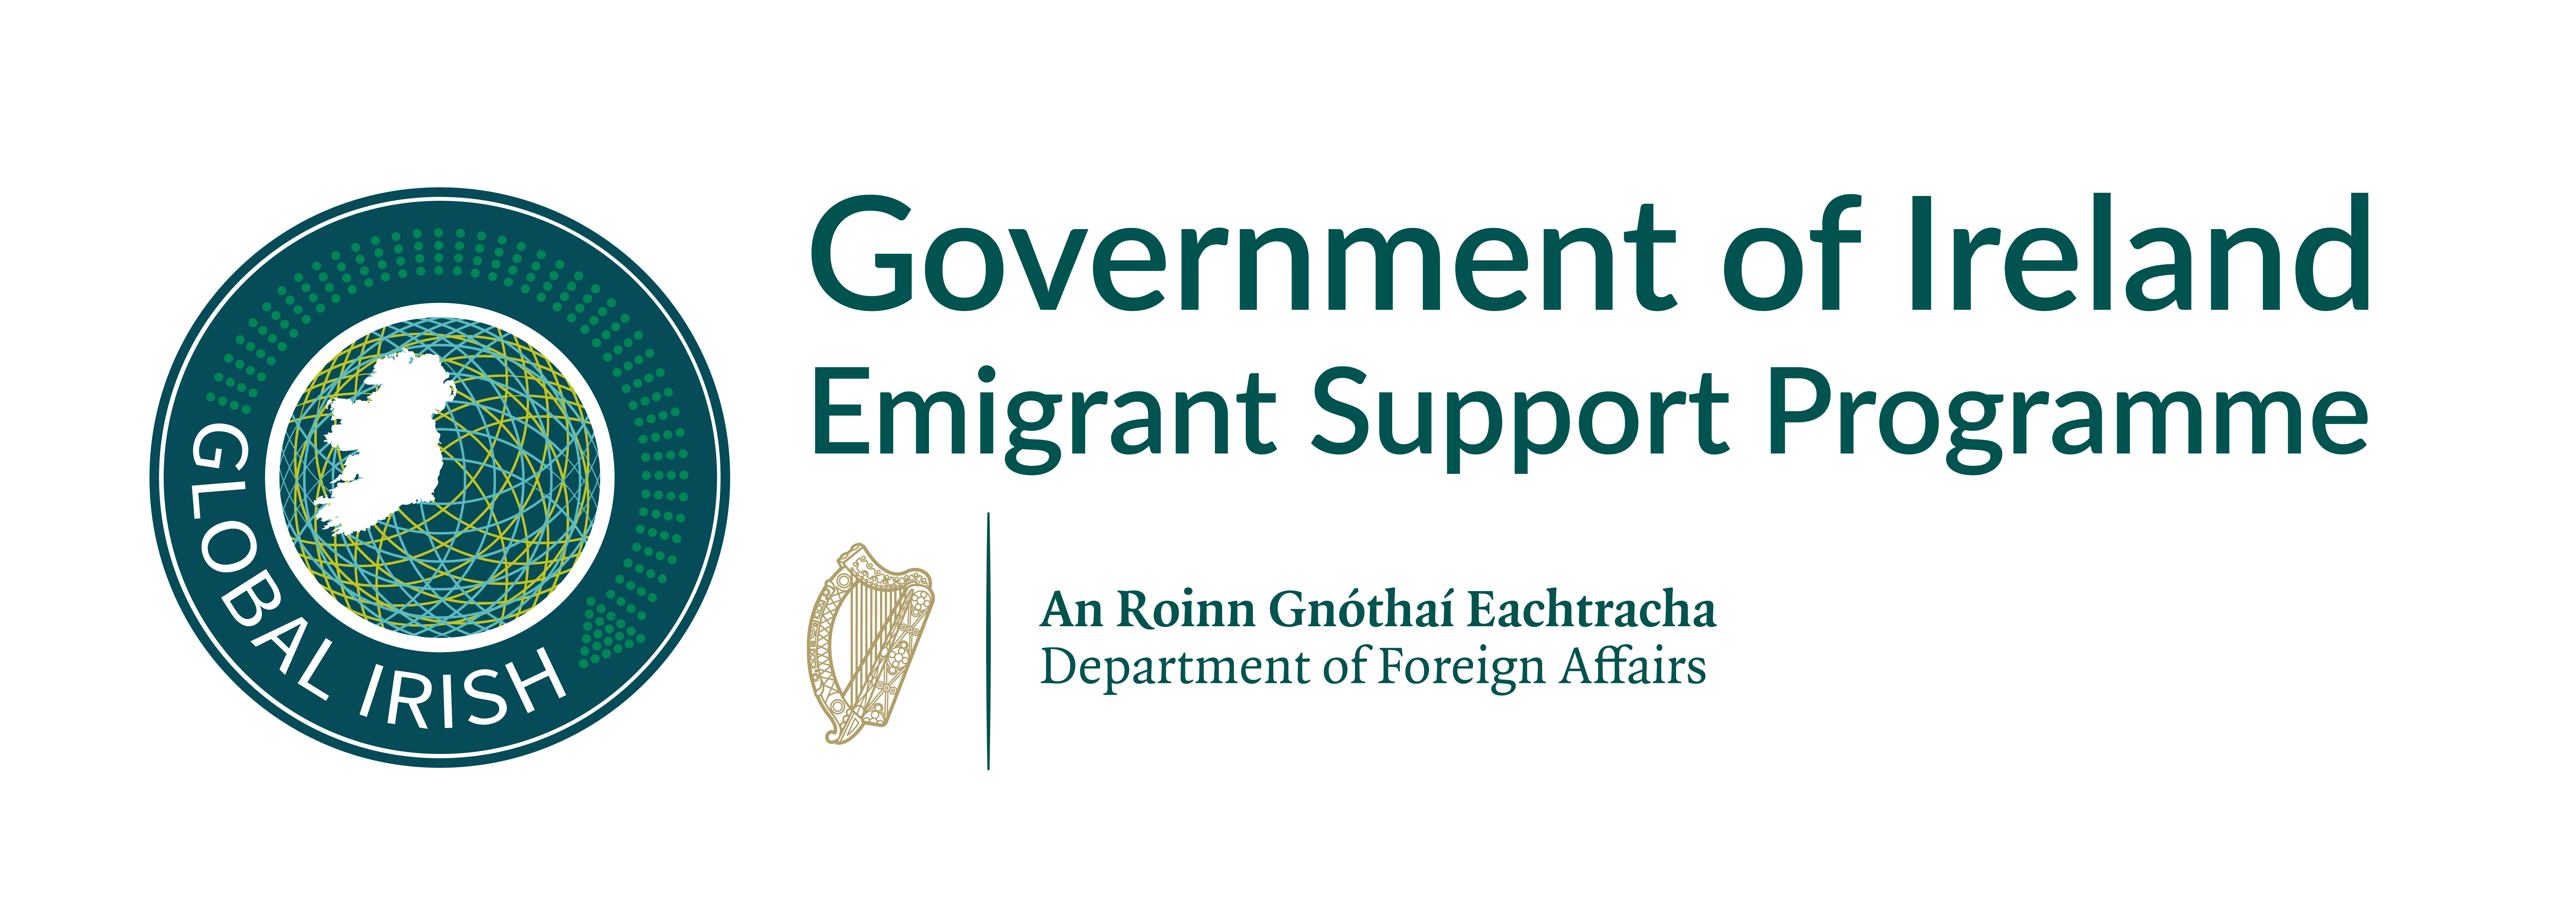 Government of Ireland Emigrant Support